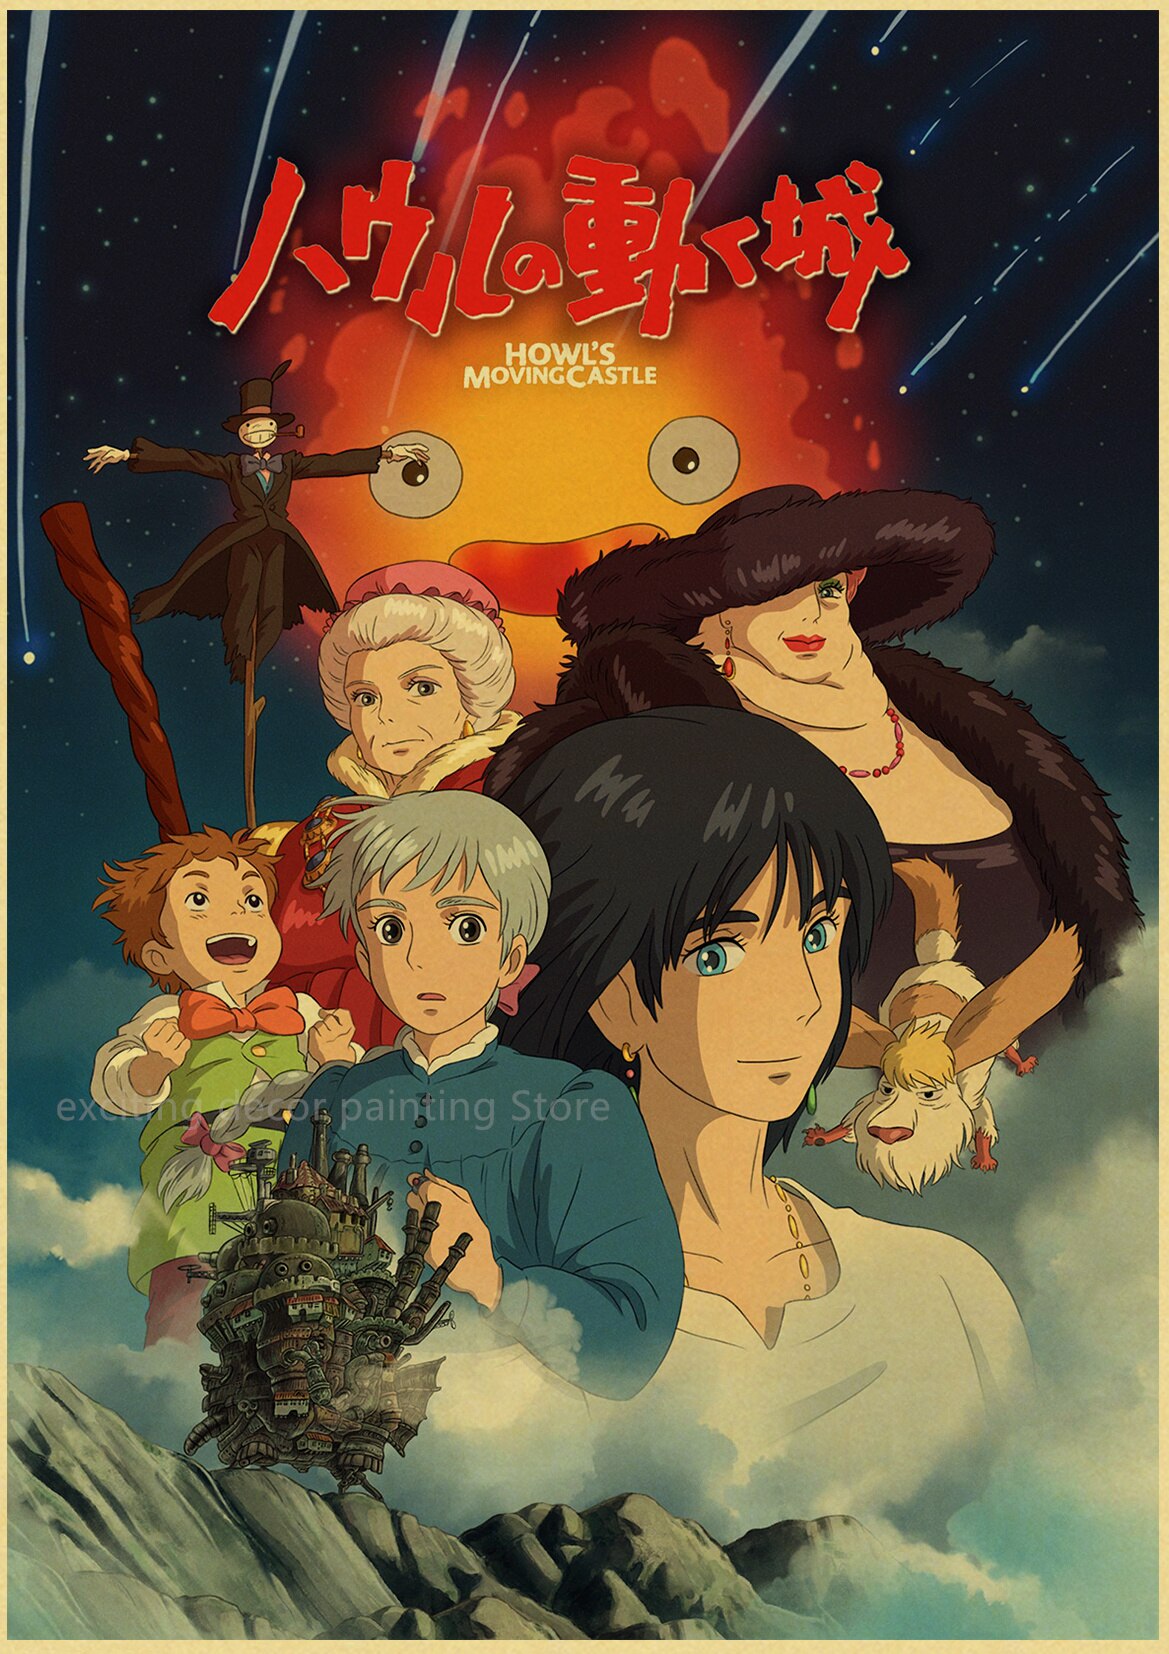 Aesthetic Wall Posters Howl's Moving Castle Studio Ghibli (Variants Available)